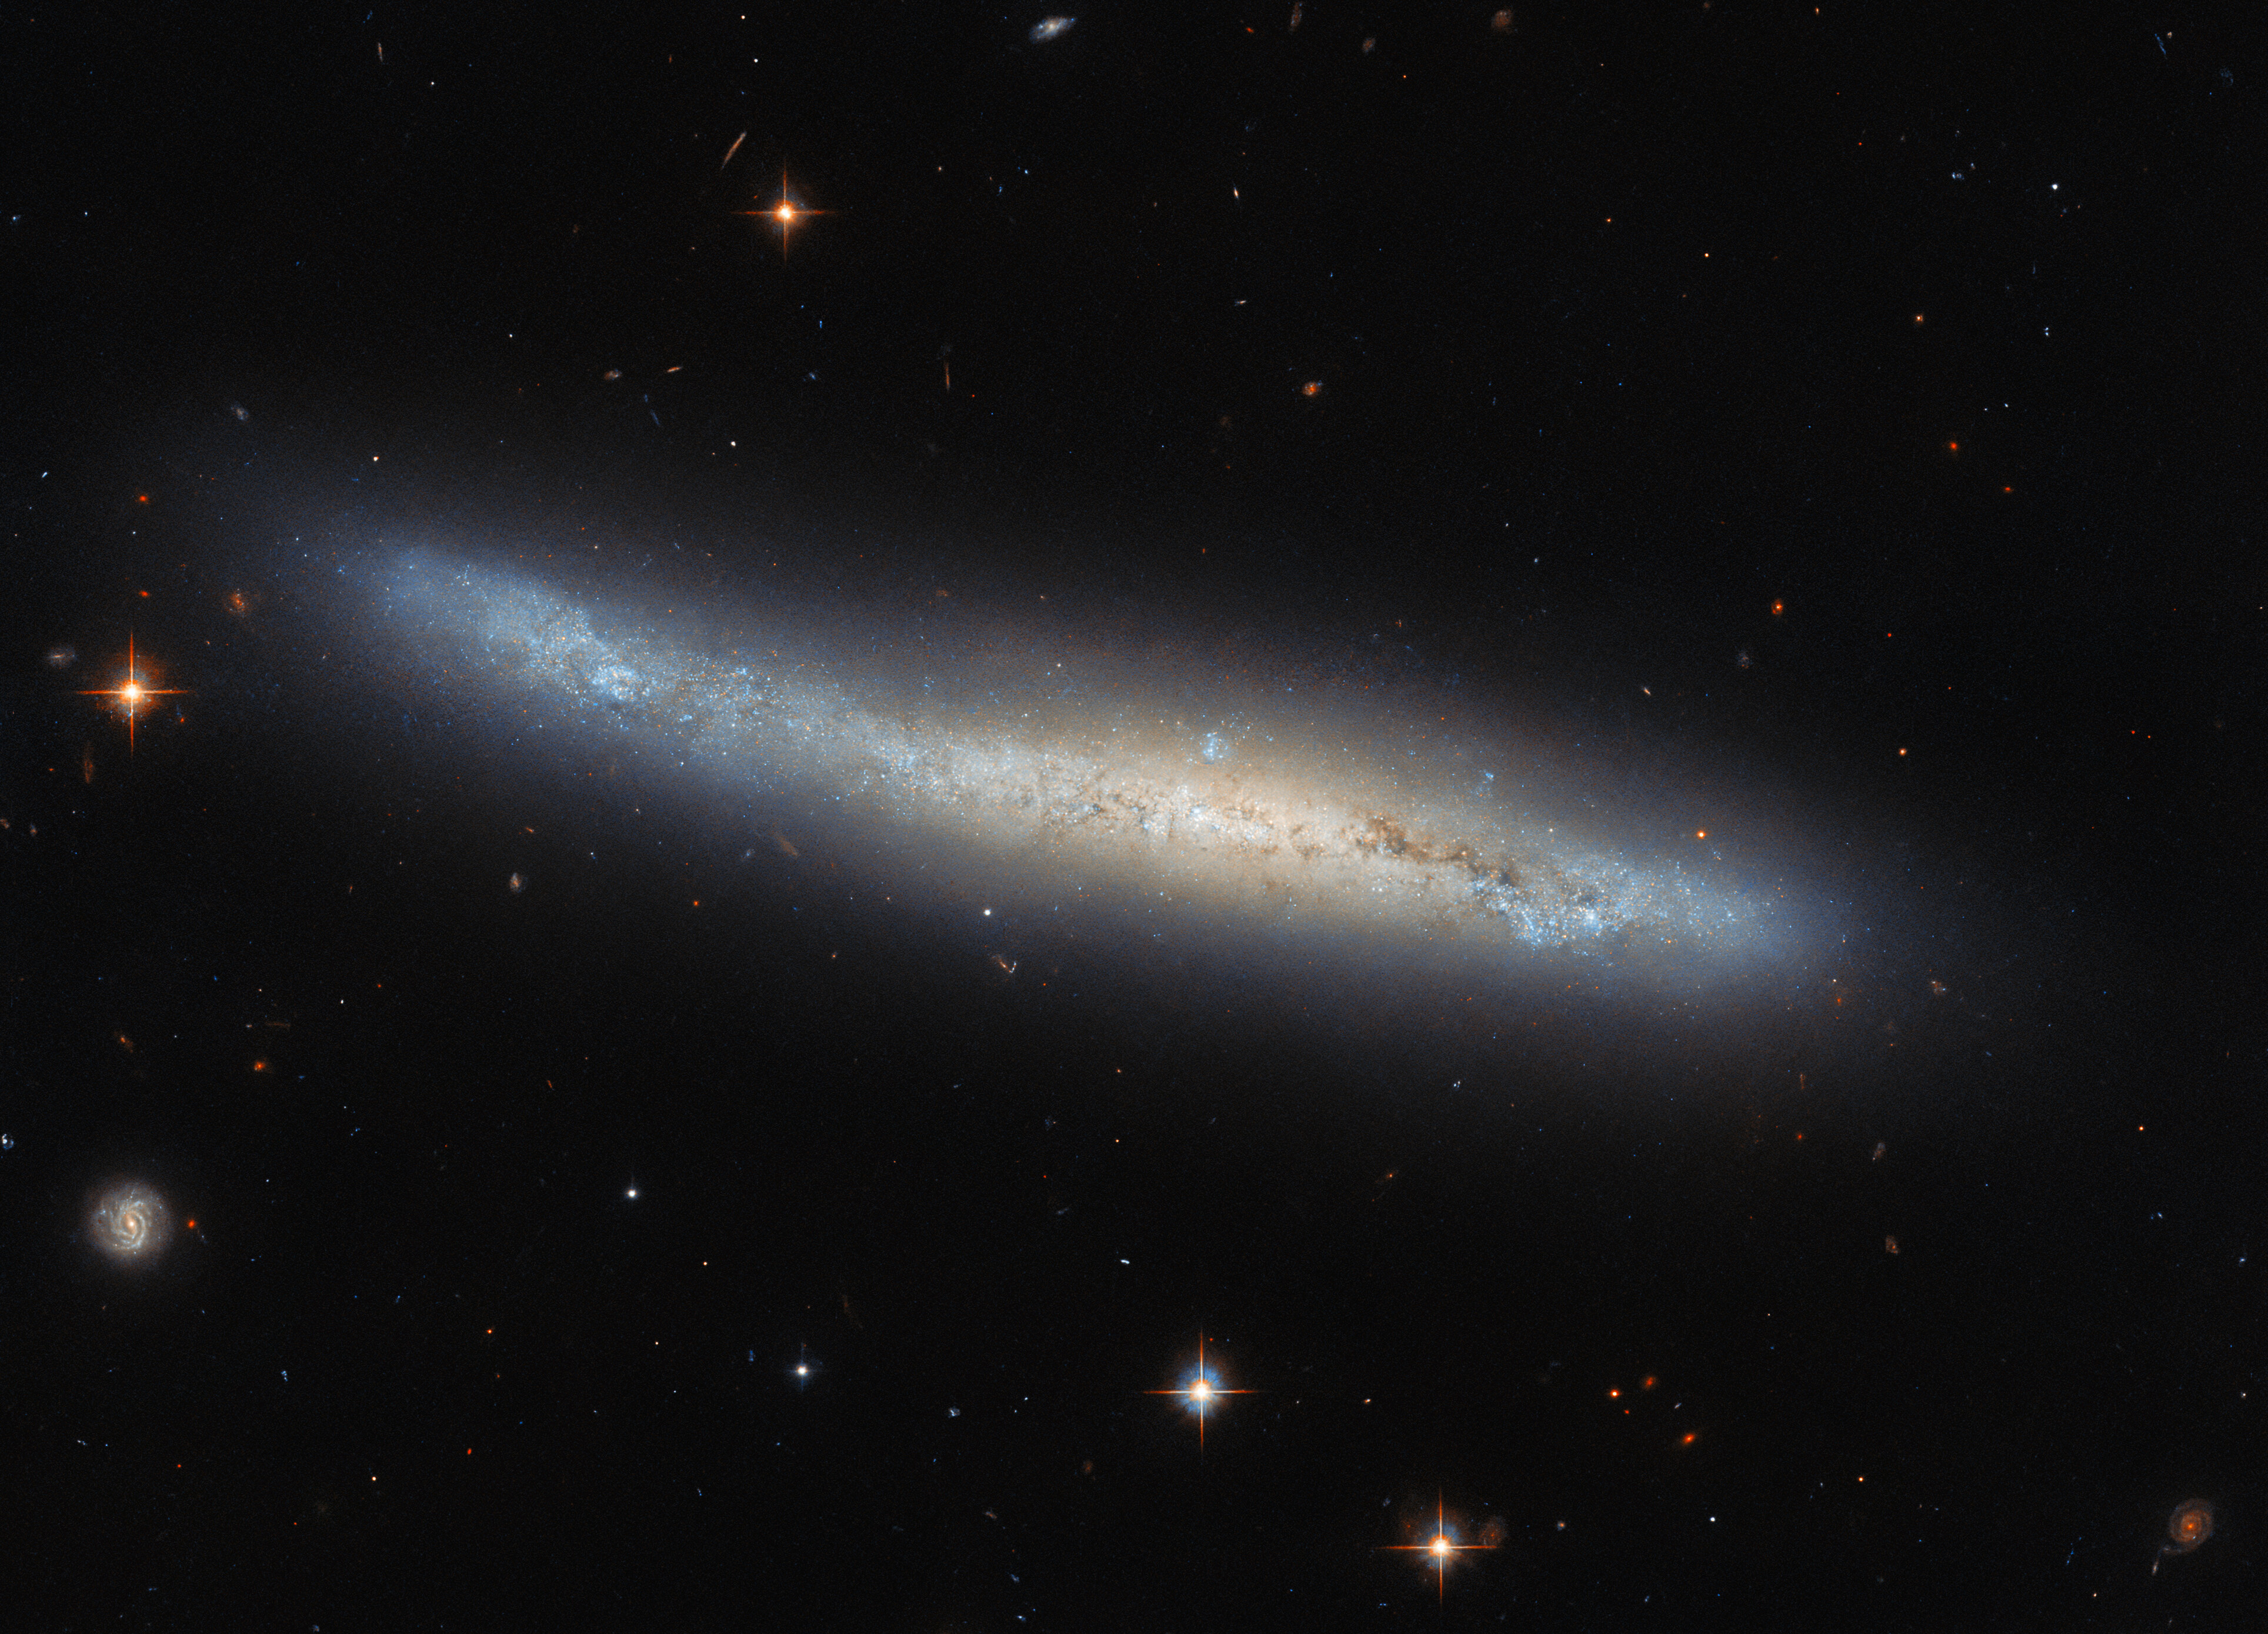 A broad spiral galaxy is seen edge-on, so that its spiral arms can’t be seen. Visible dust and stars trace the disk of the galaxy, surrounded by a glowing halo above and below. The color of the galaxy changes smoothly between the outer disk at the ends and the bulge in the center. A few bright stars surround the galaxy on a dark background.